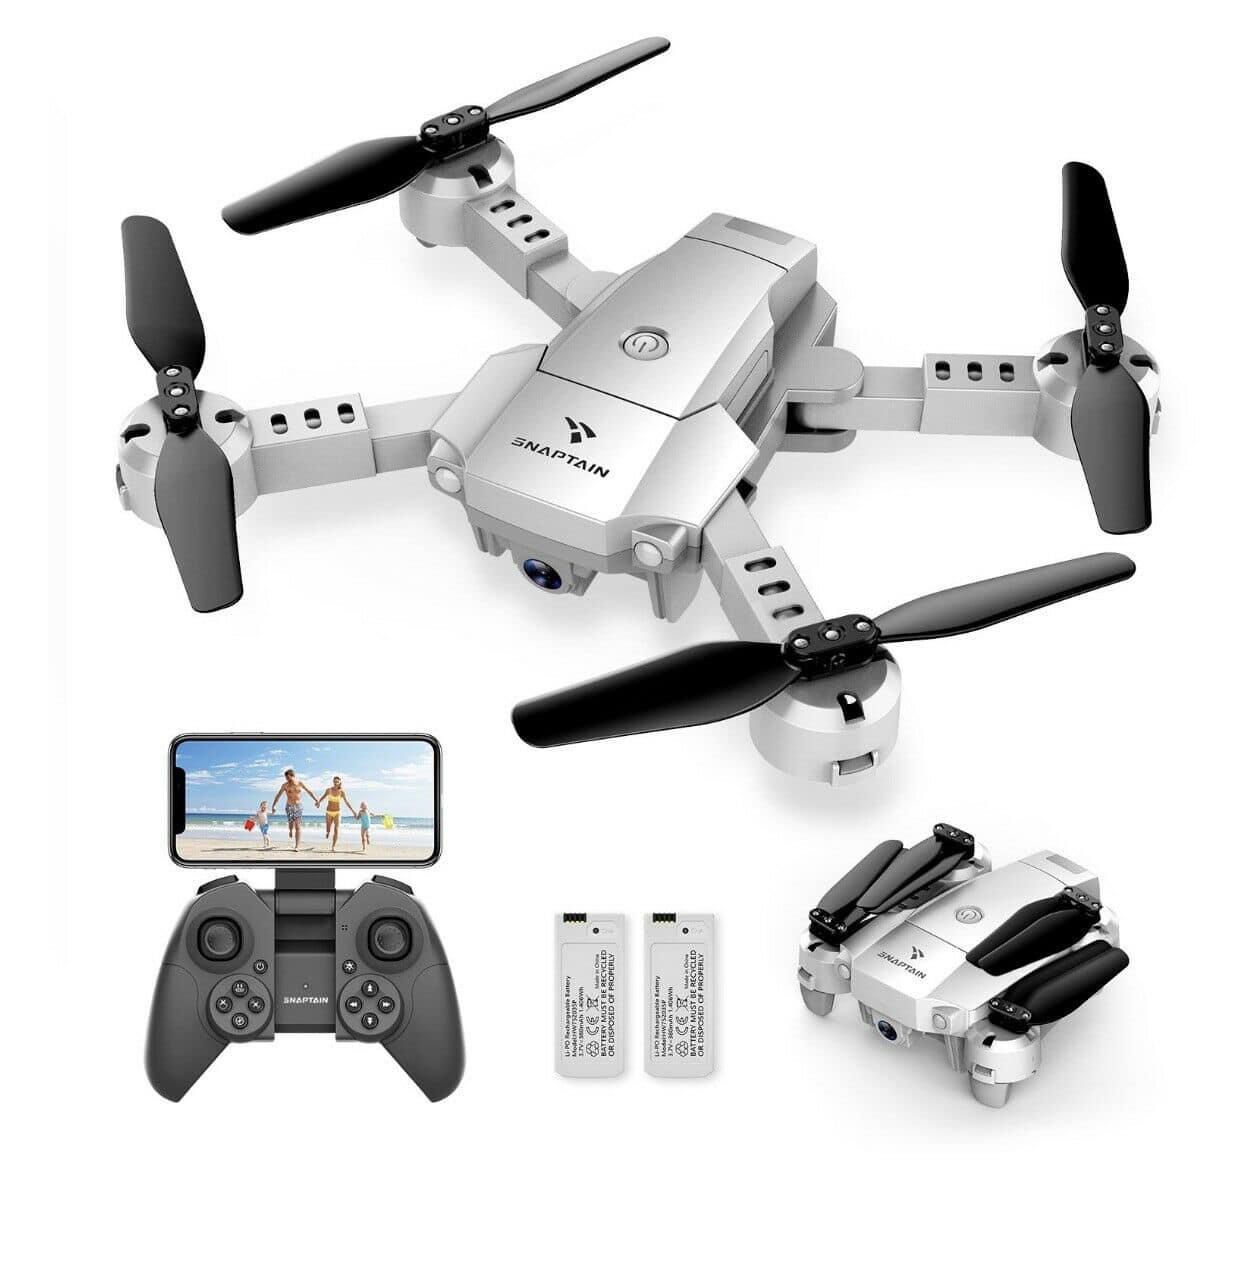 SNAPTAIN A10 Mini Foldable Drone with 1080P HD Camera FPV Wifi RC Quadcopter